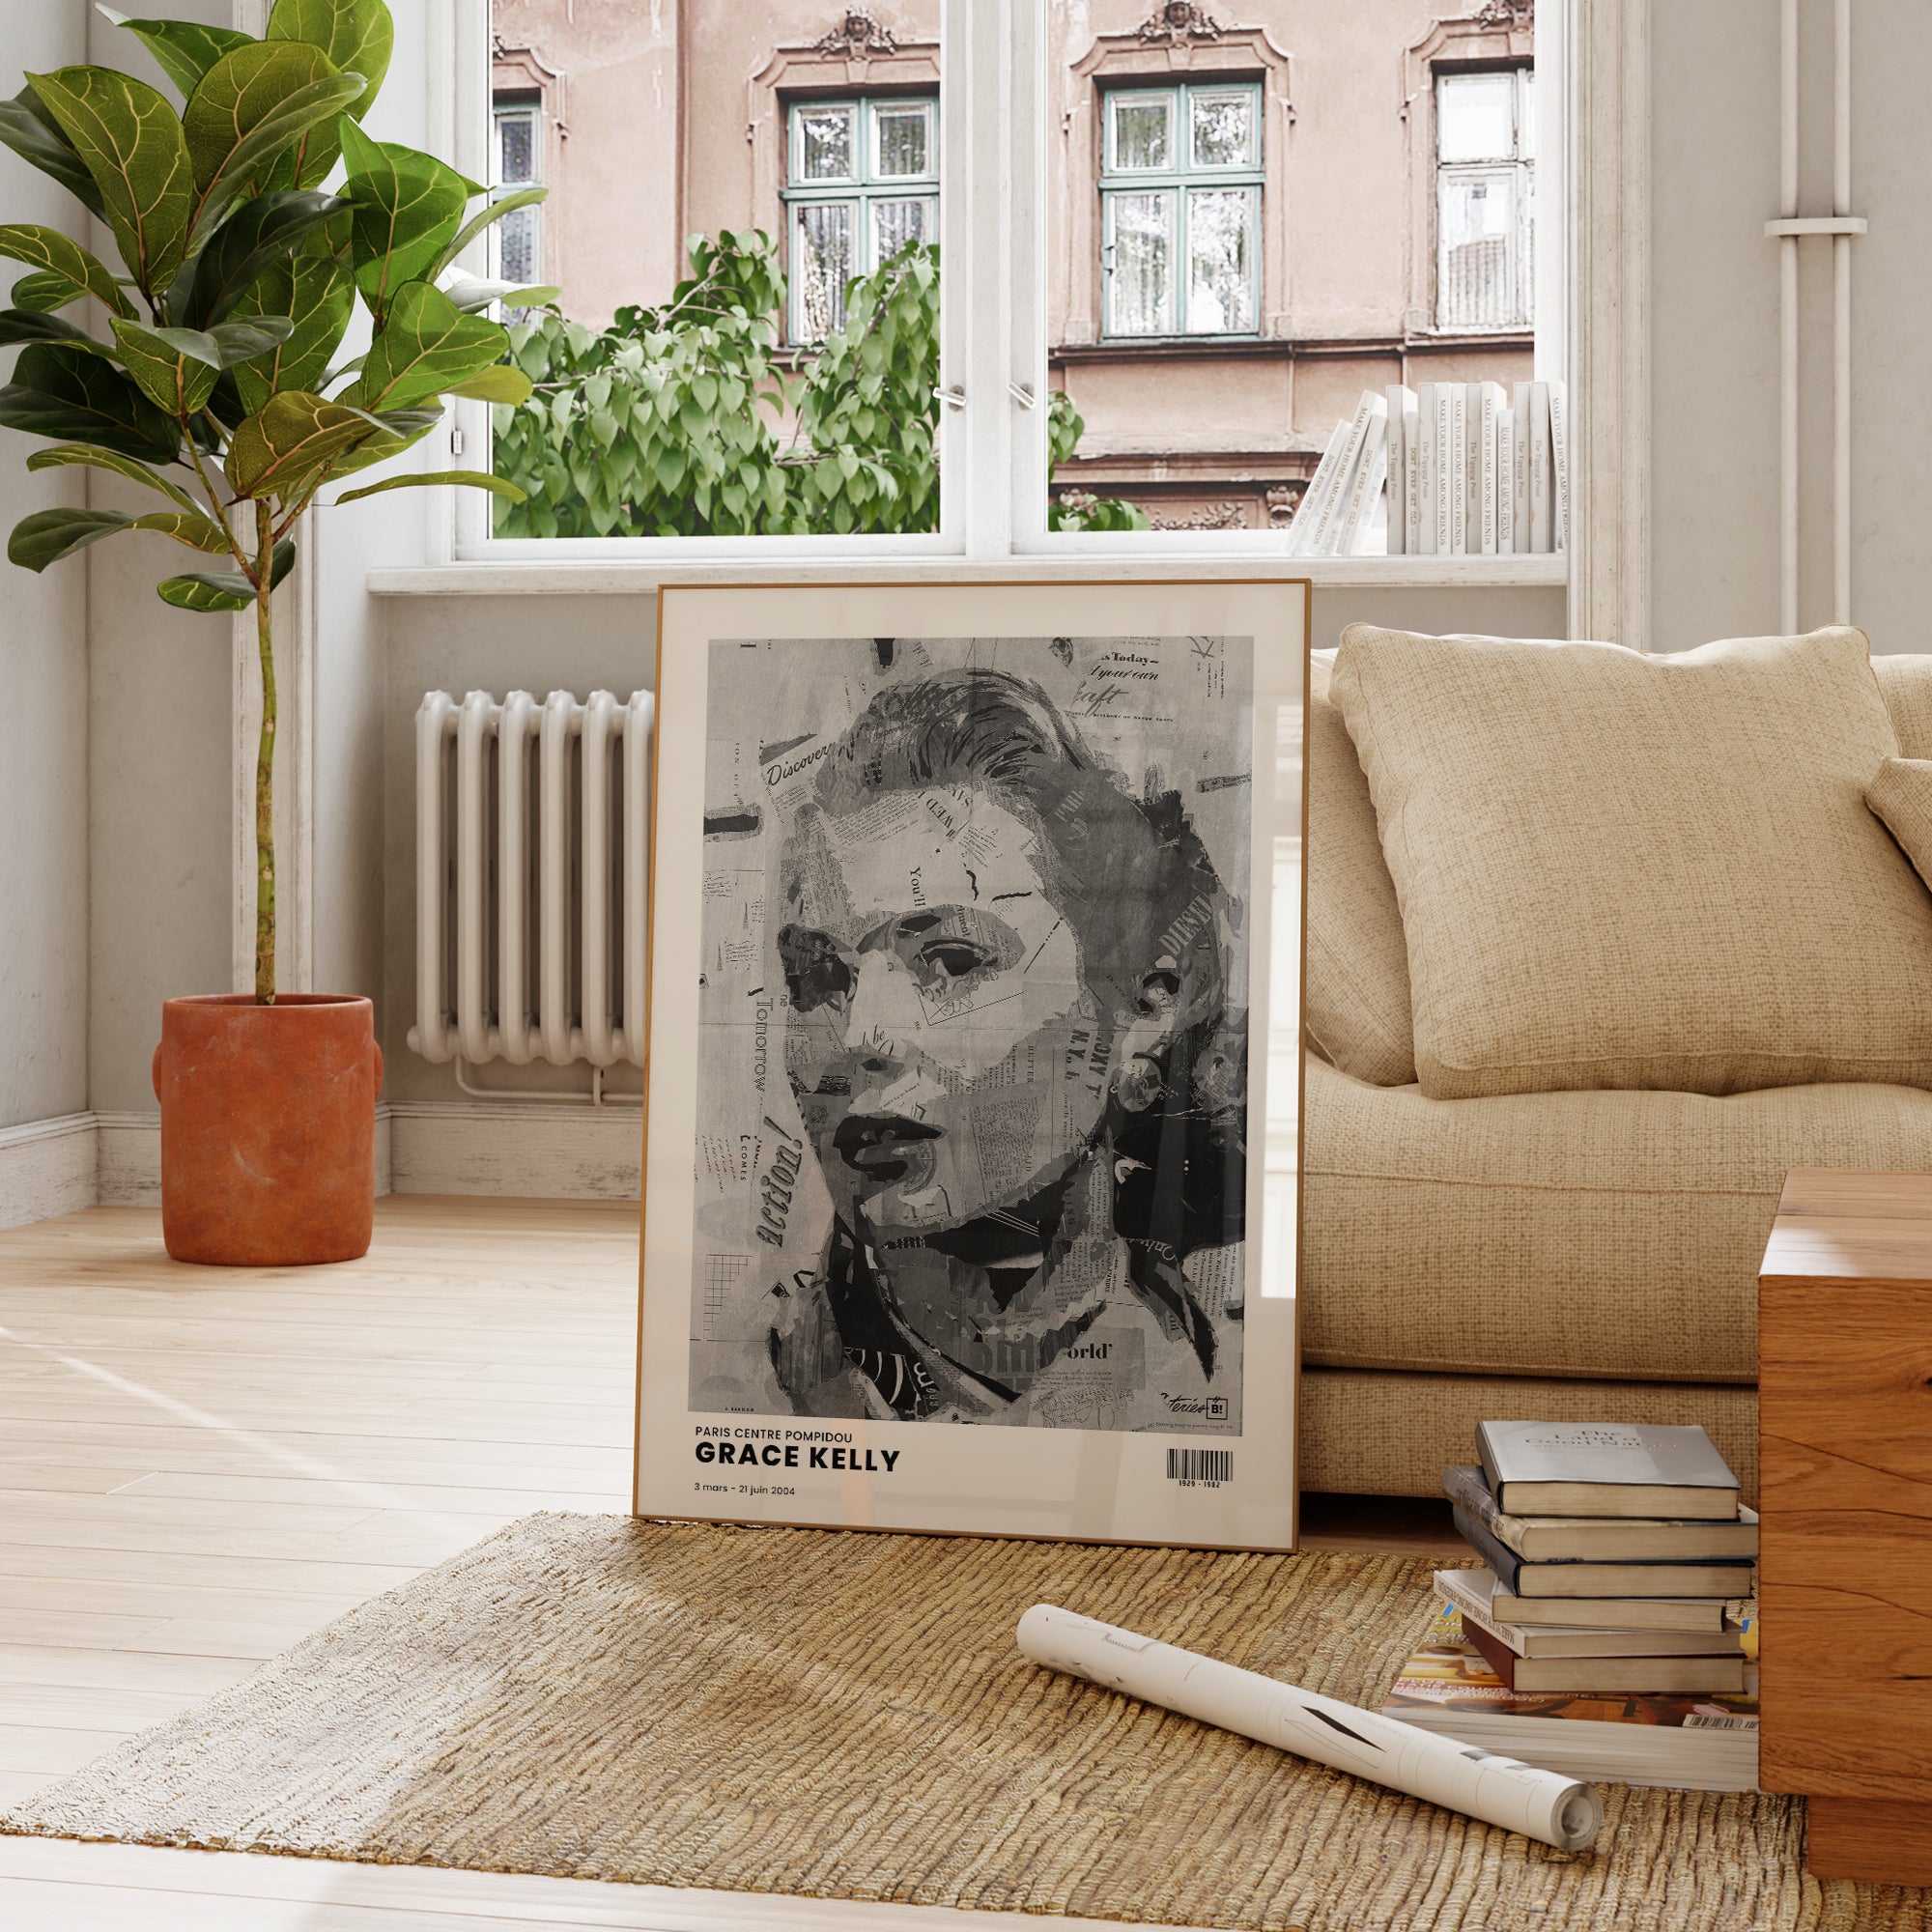 Be inspired by Iconic Grace Kelly Paris Centre Pompidou Exhibition Art Print. The artwork is presented in a bohemian room that captures its timeless beauty in every detail.